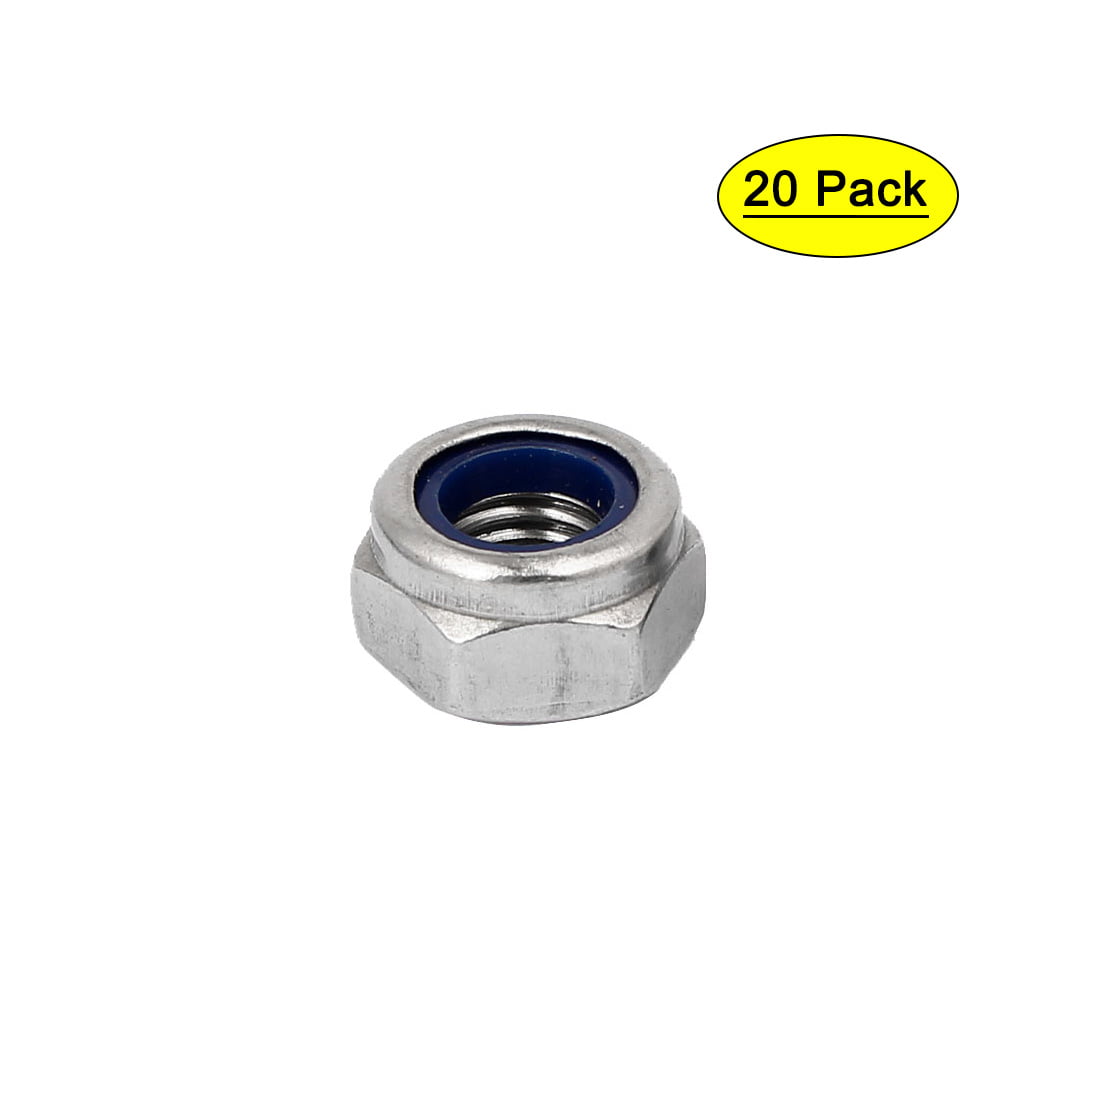 10-32 Stainless Steel Flange Nuts Serrated Base Lock Anti Vibration Qty 25 